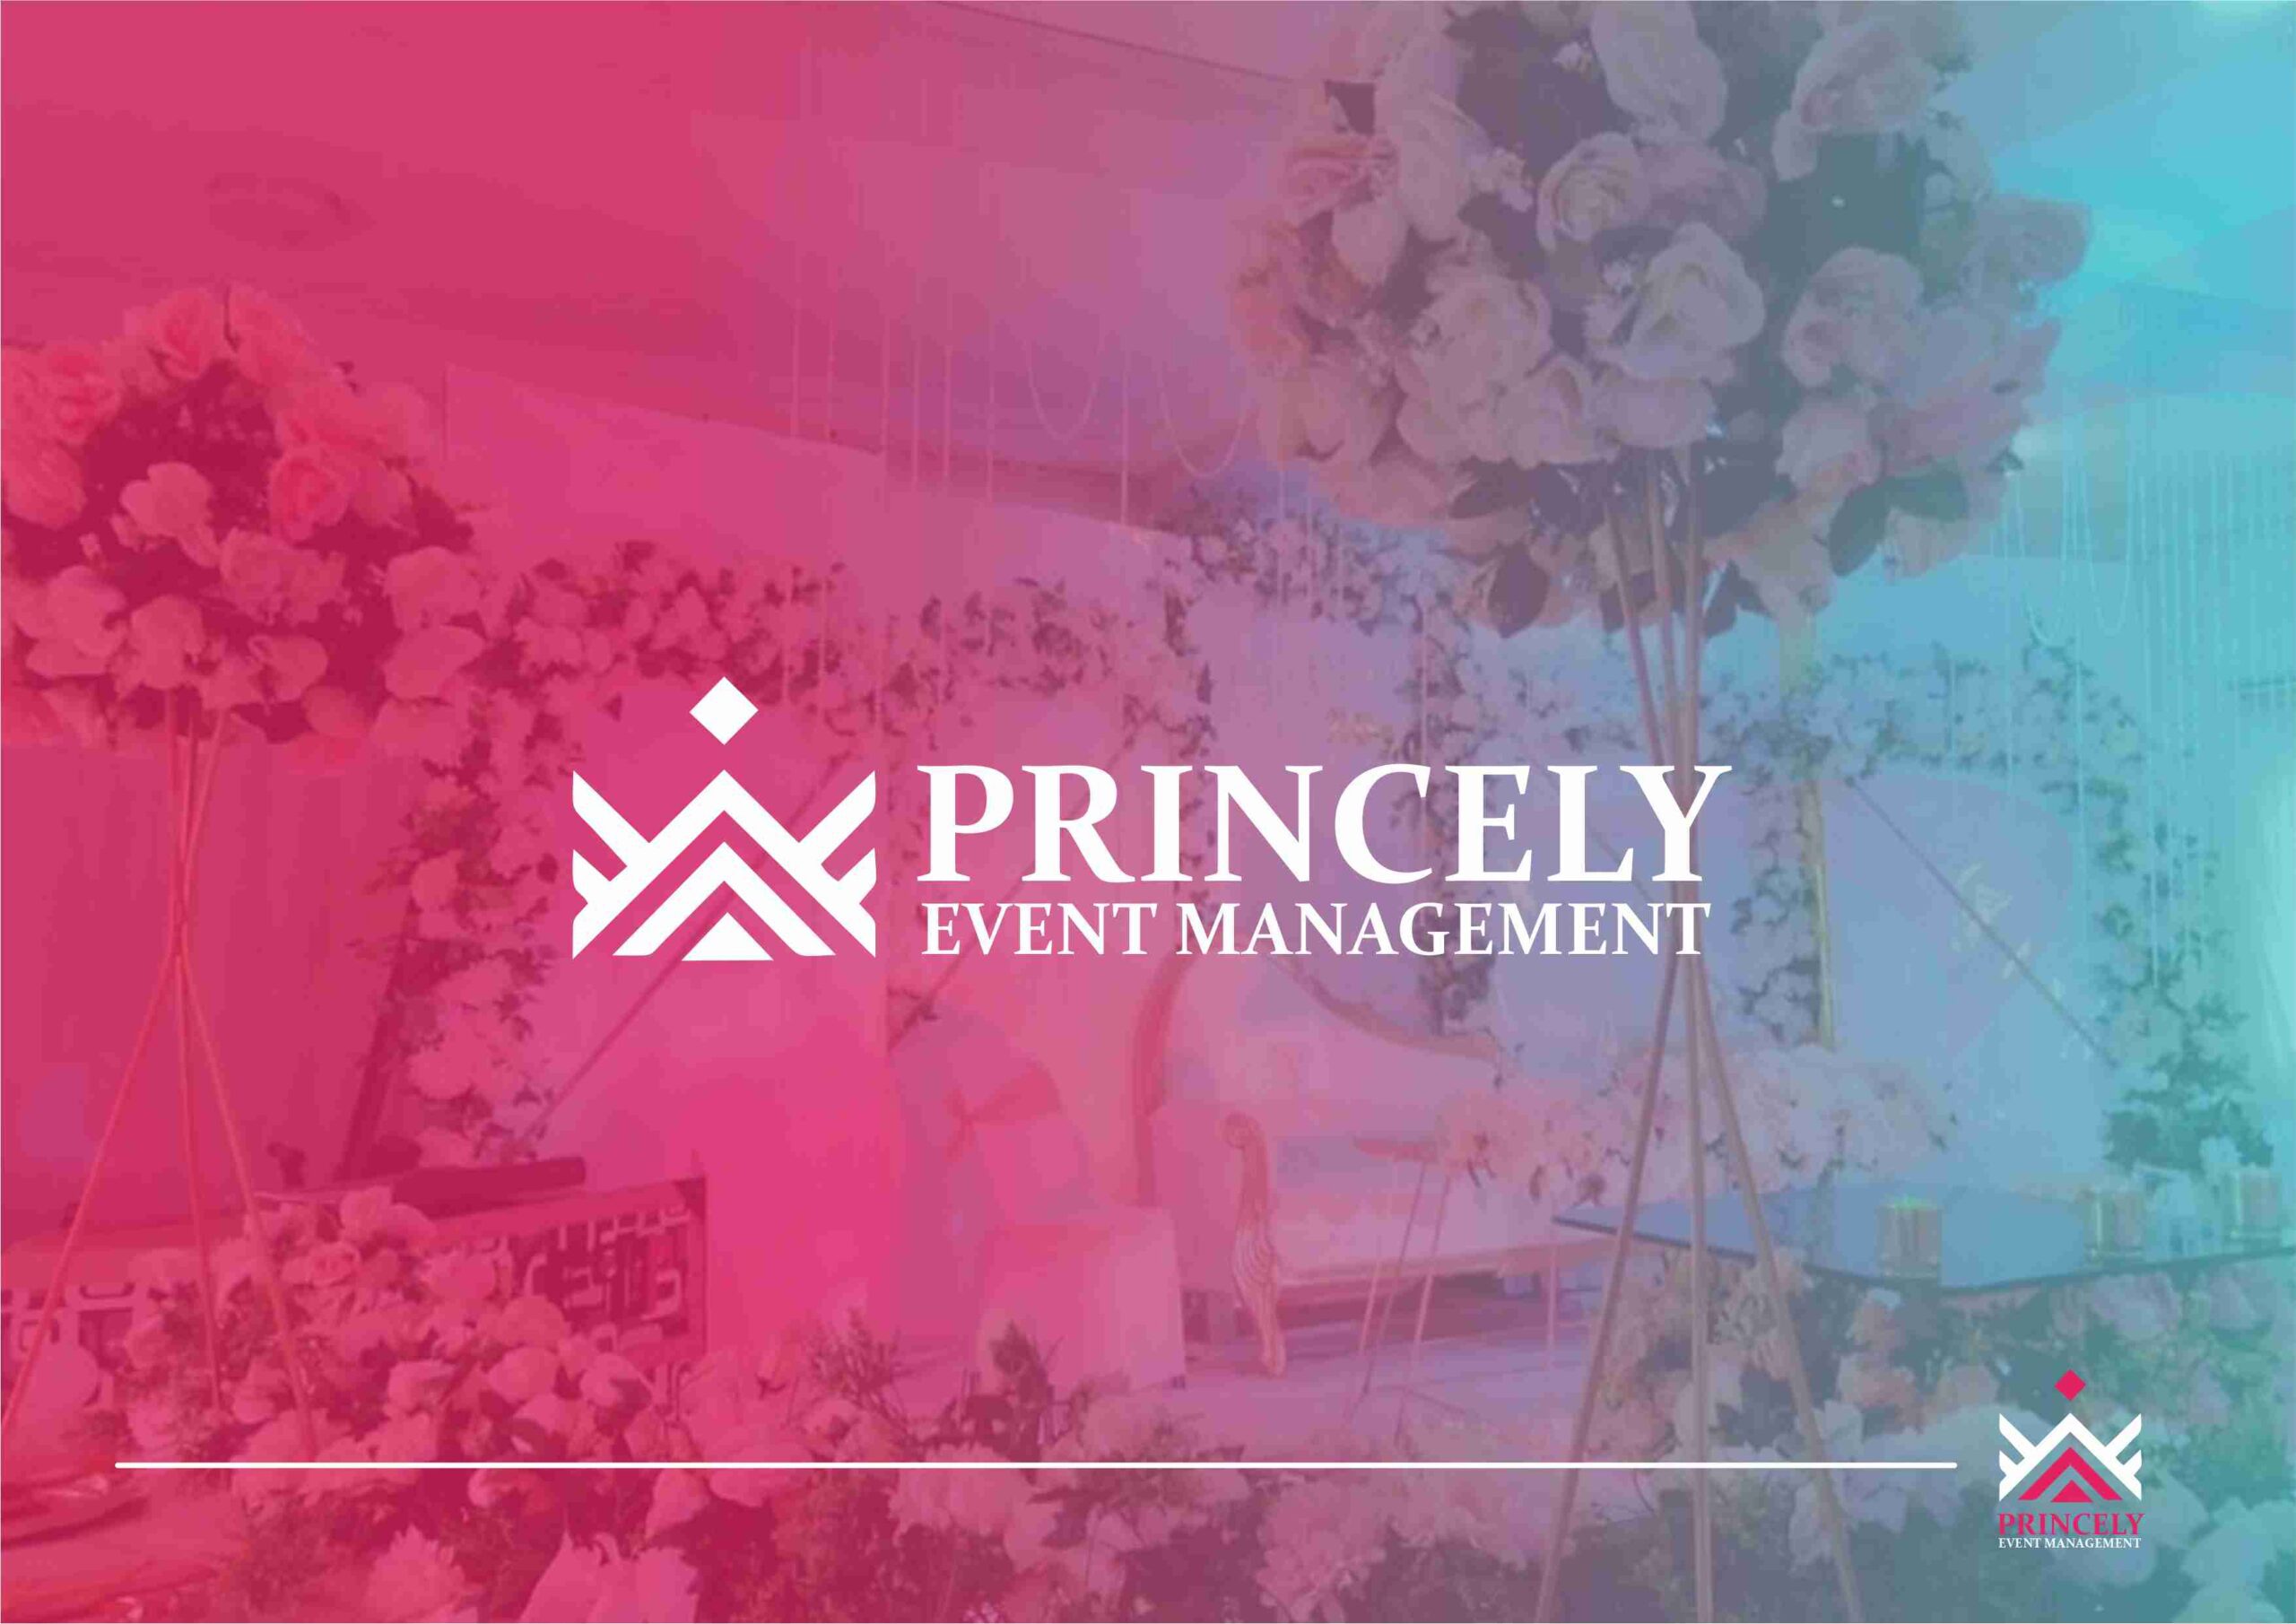 PRINCELY EVENT MANAGEMENT